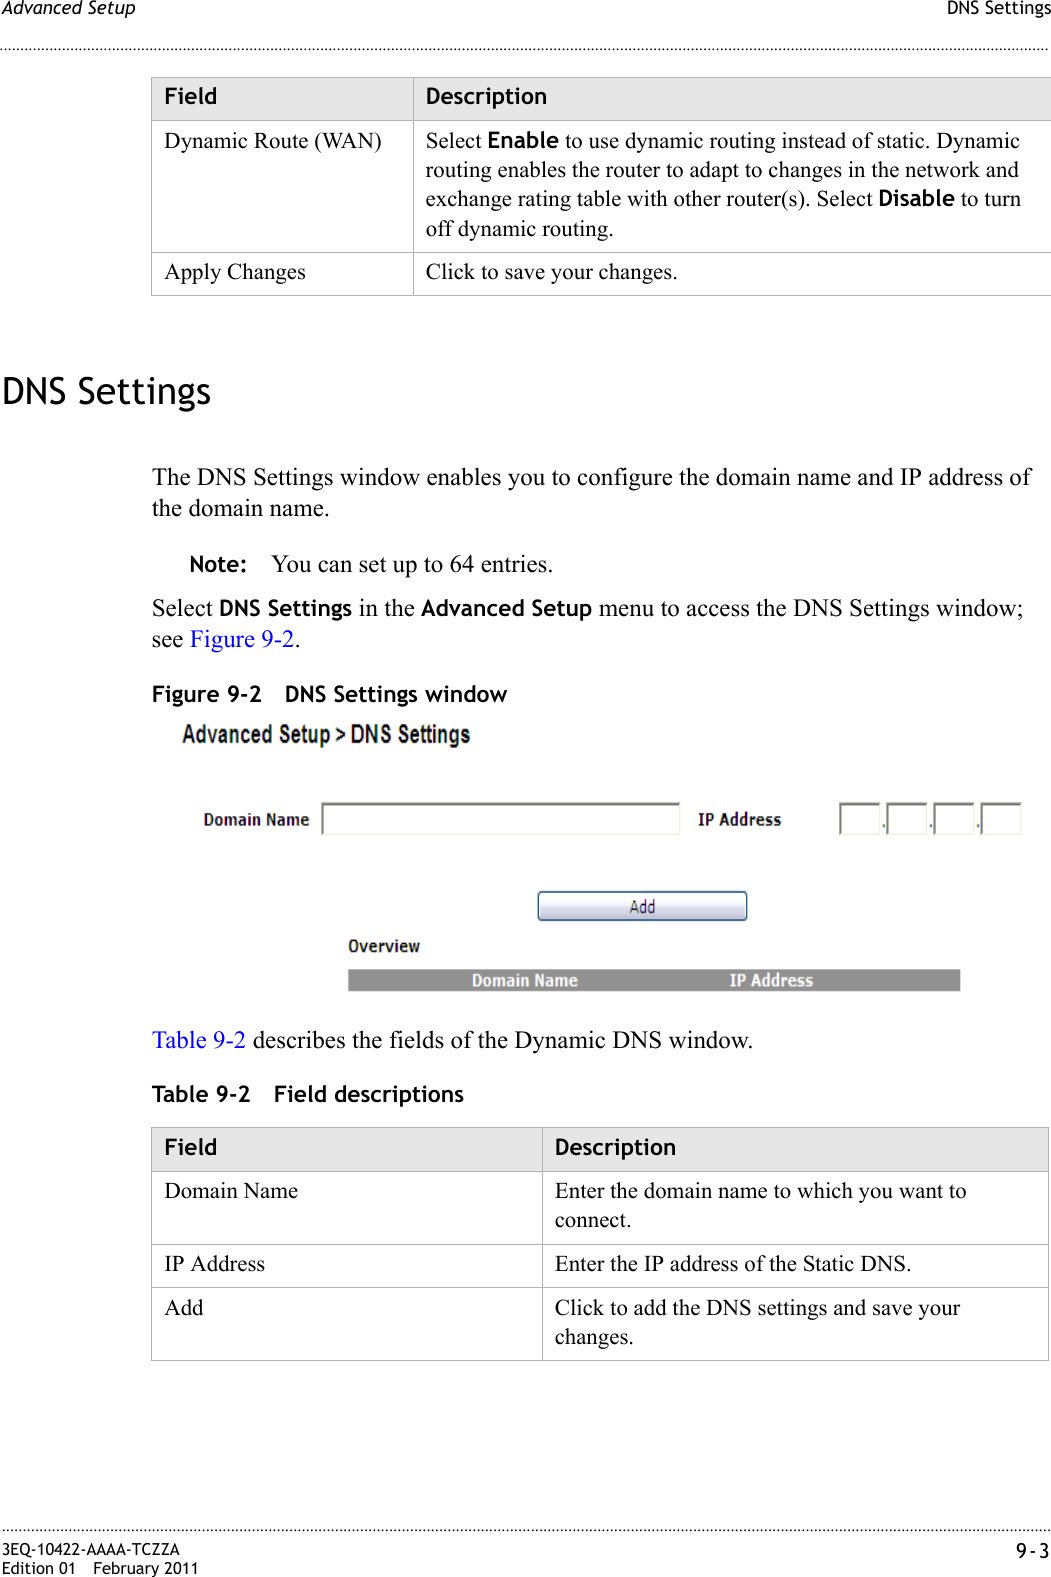 DNS SettingsAdvanced Setup............................................................................................................................................................................................................................................................3EQ-10422-AAAA-TCZZAEdition 01 February 2011 9-3............................................................................................................................................................................................................................................................DNS SettingsThe DNS Settings window enables you to configure the domain name and IP address of the domain name.Note: You can set up to 64 entries.Select DNS Settings in the Advanced Setup menu to access the DNS Settings window; see Figure 9-2.Figure 9-2 DNS Settings windowTable 9-2 describes the fields of the Dynamic DNS window.Table 9-2 Field descriptionsDynamic Route (WAN) Select Enable to use dynamic routing instead of static. Dynamic routing enables the router to adapt to changes in the network and exchange rating table with other router(s). Select Disable to turn off dynamic routing.Apply Changes Click to save your changes.Field DescriptionField DescriptionDomain Name Enter the domain name to which you want to connect.IP Address Enter the IP address of the Static DNS.Add Click to add the DNS settings and save your changes.